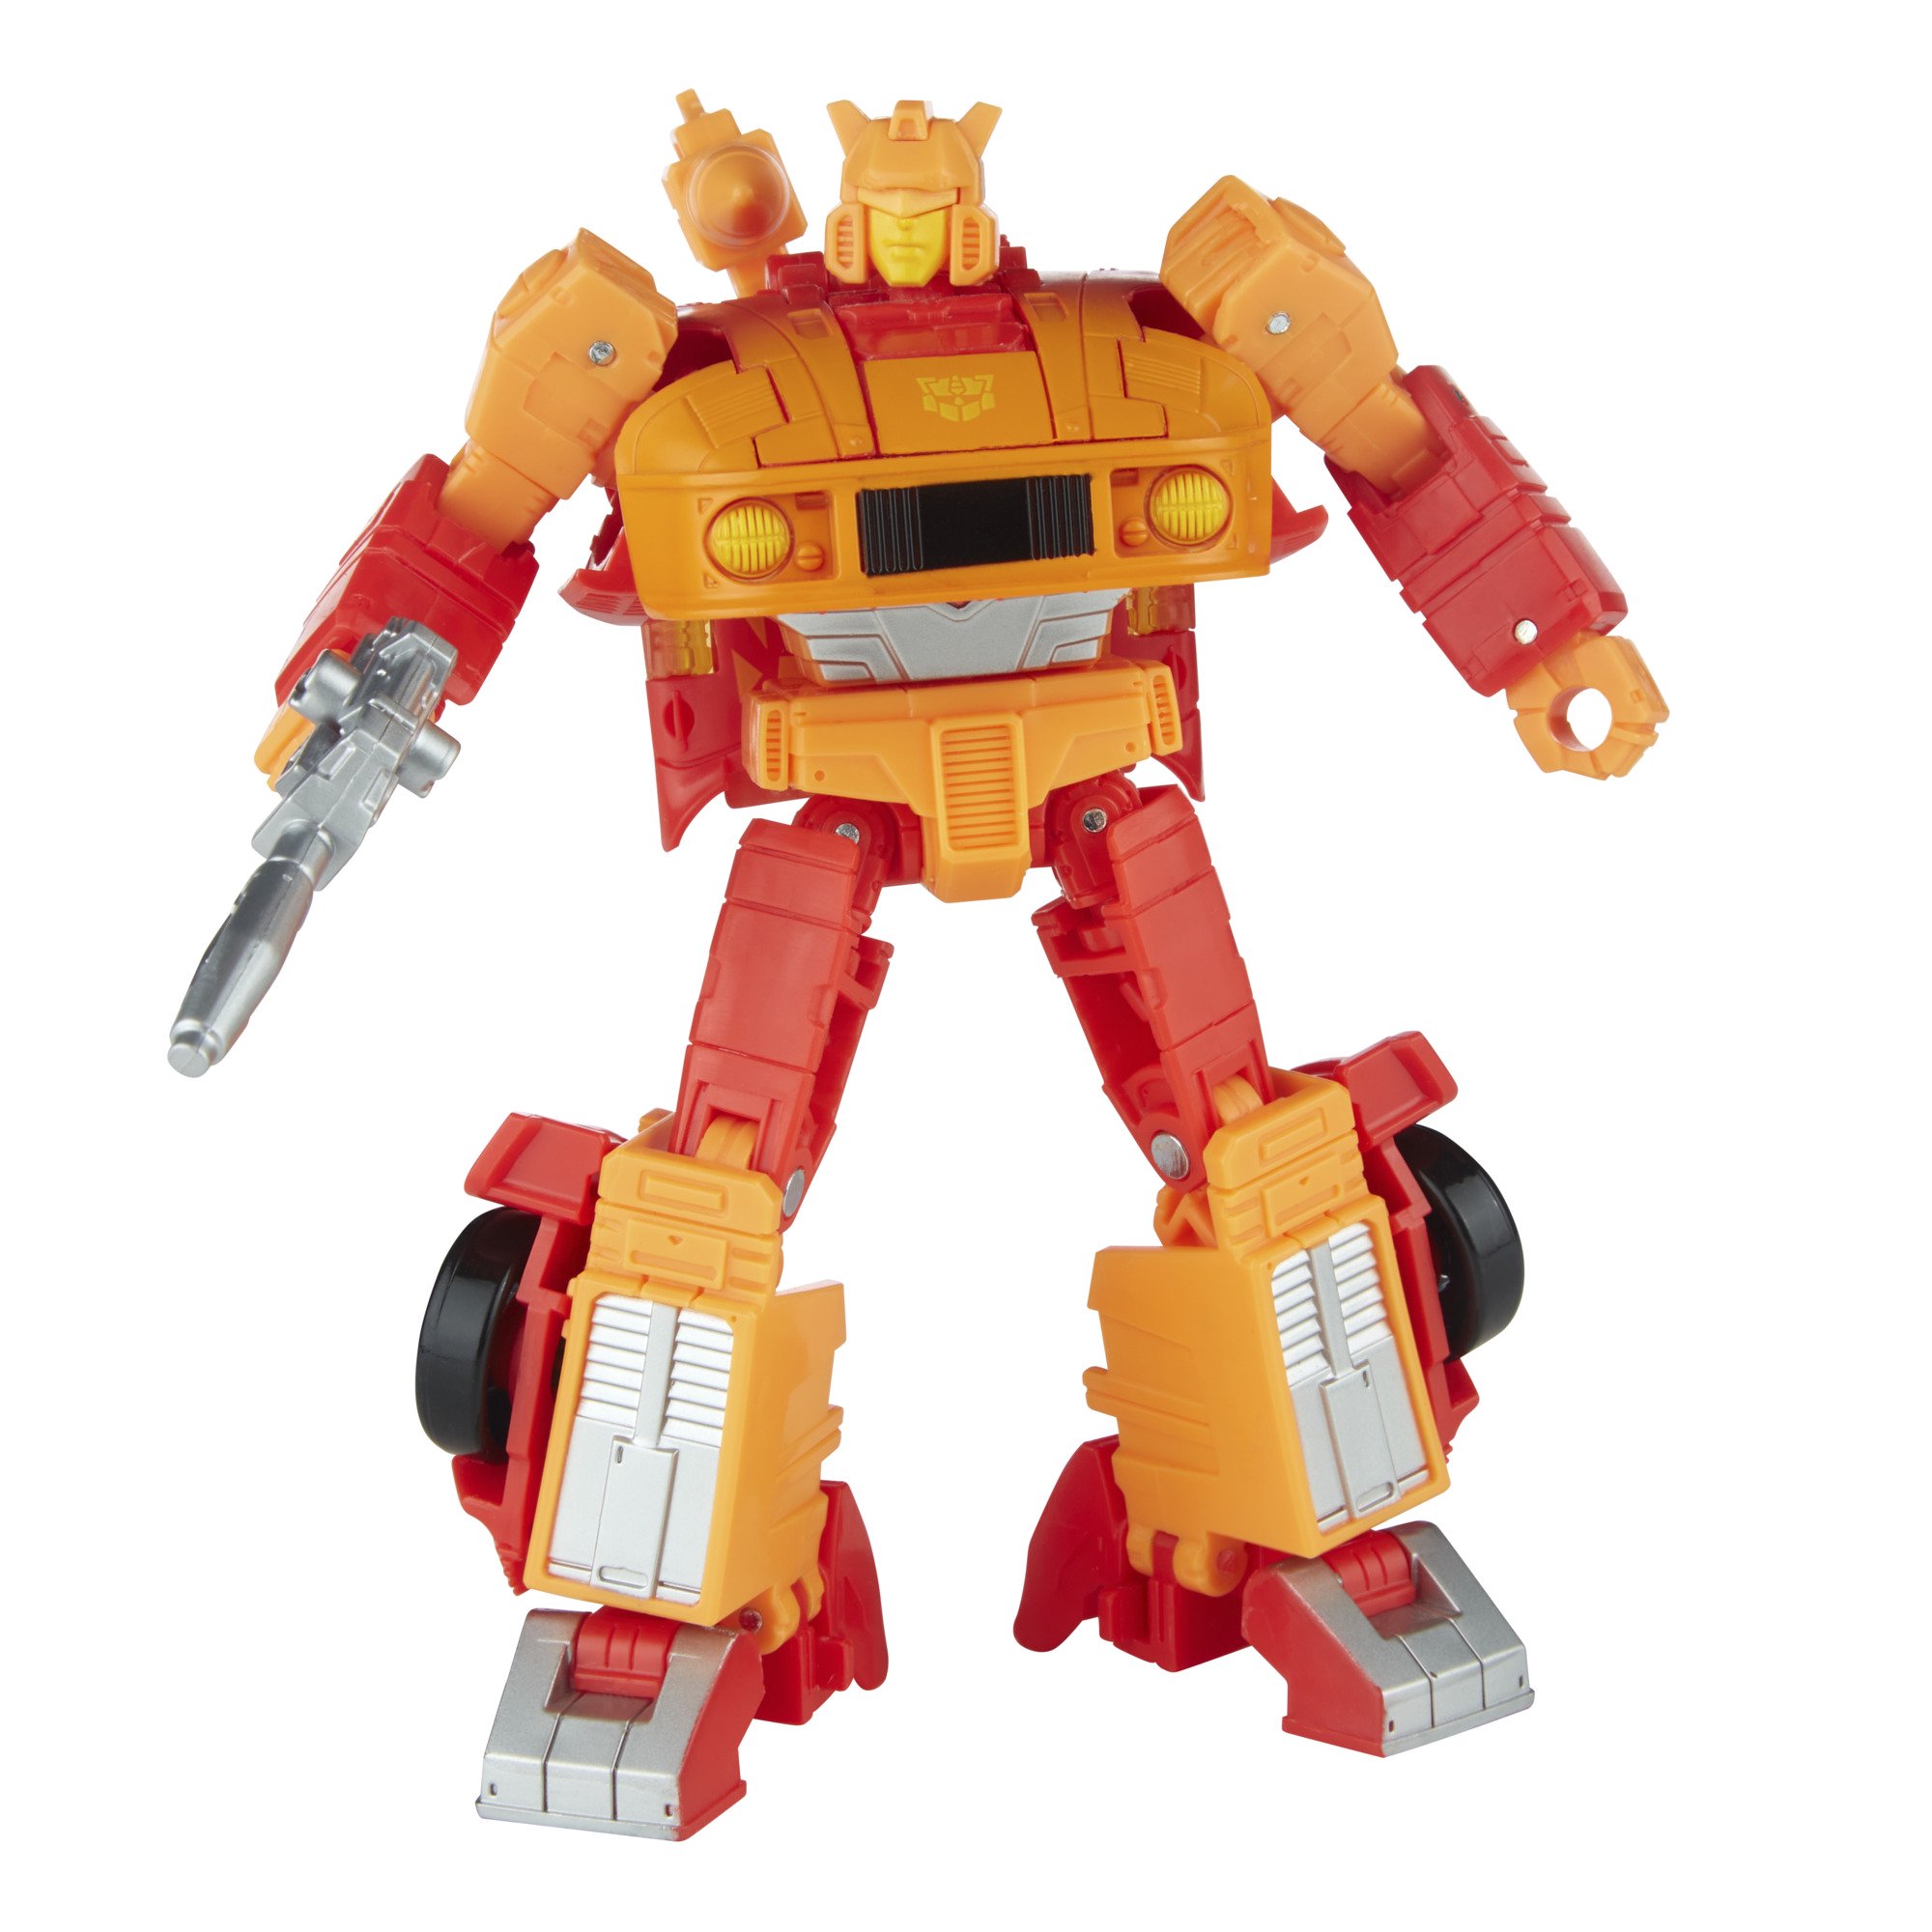 Transformers Knock Out Joins Hasbro's Exclusive Walmart R.E.D Line